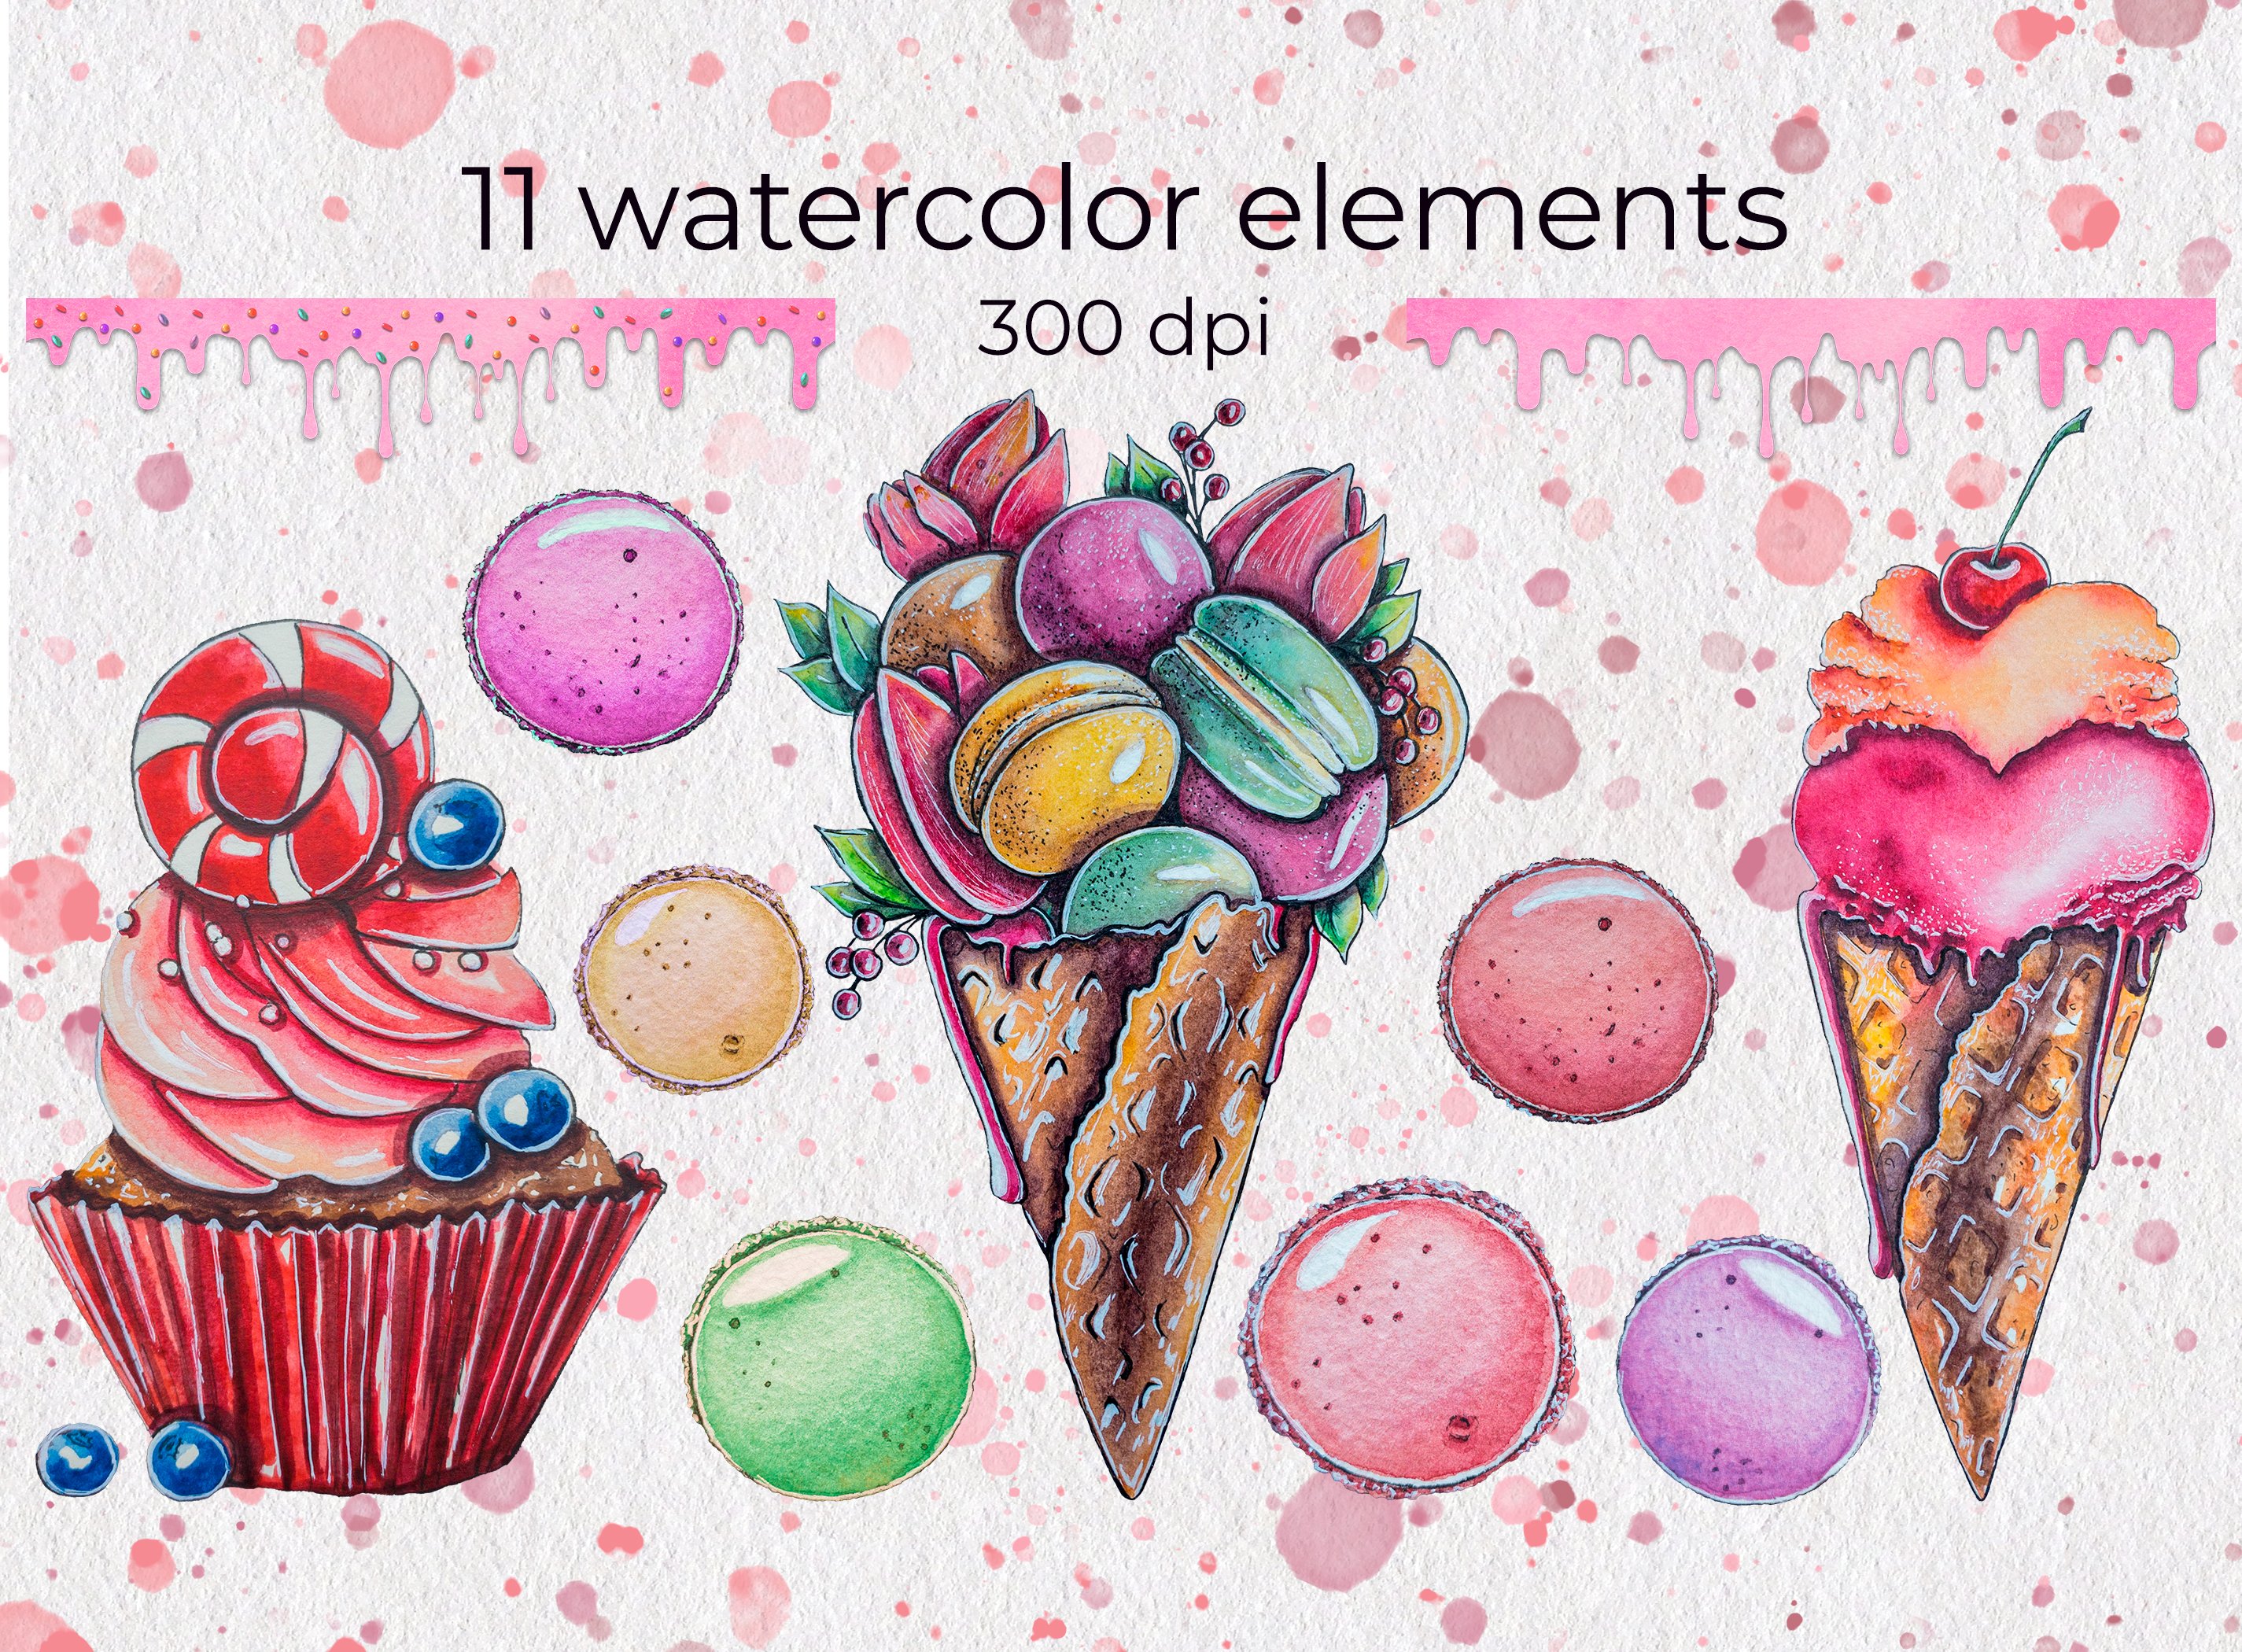 Colorful and tasty ice cream illustration with macaroons.